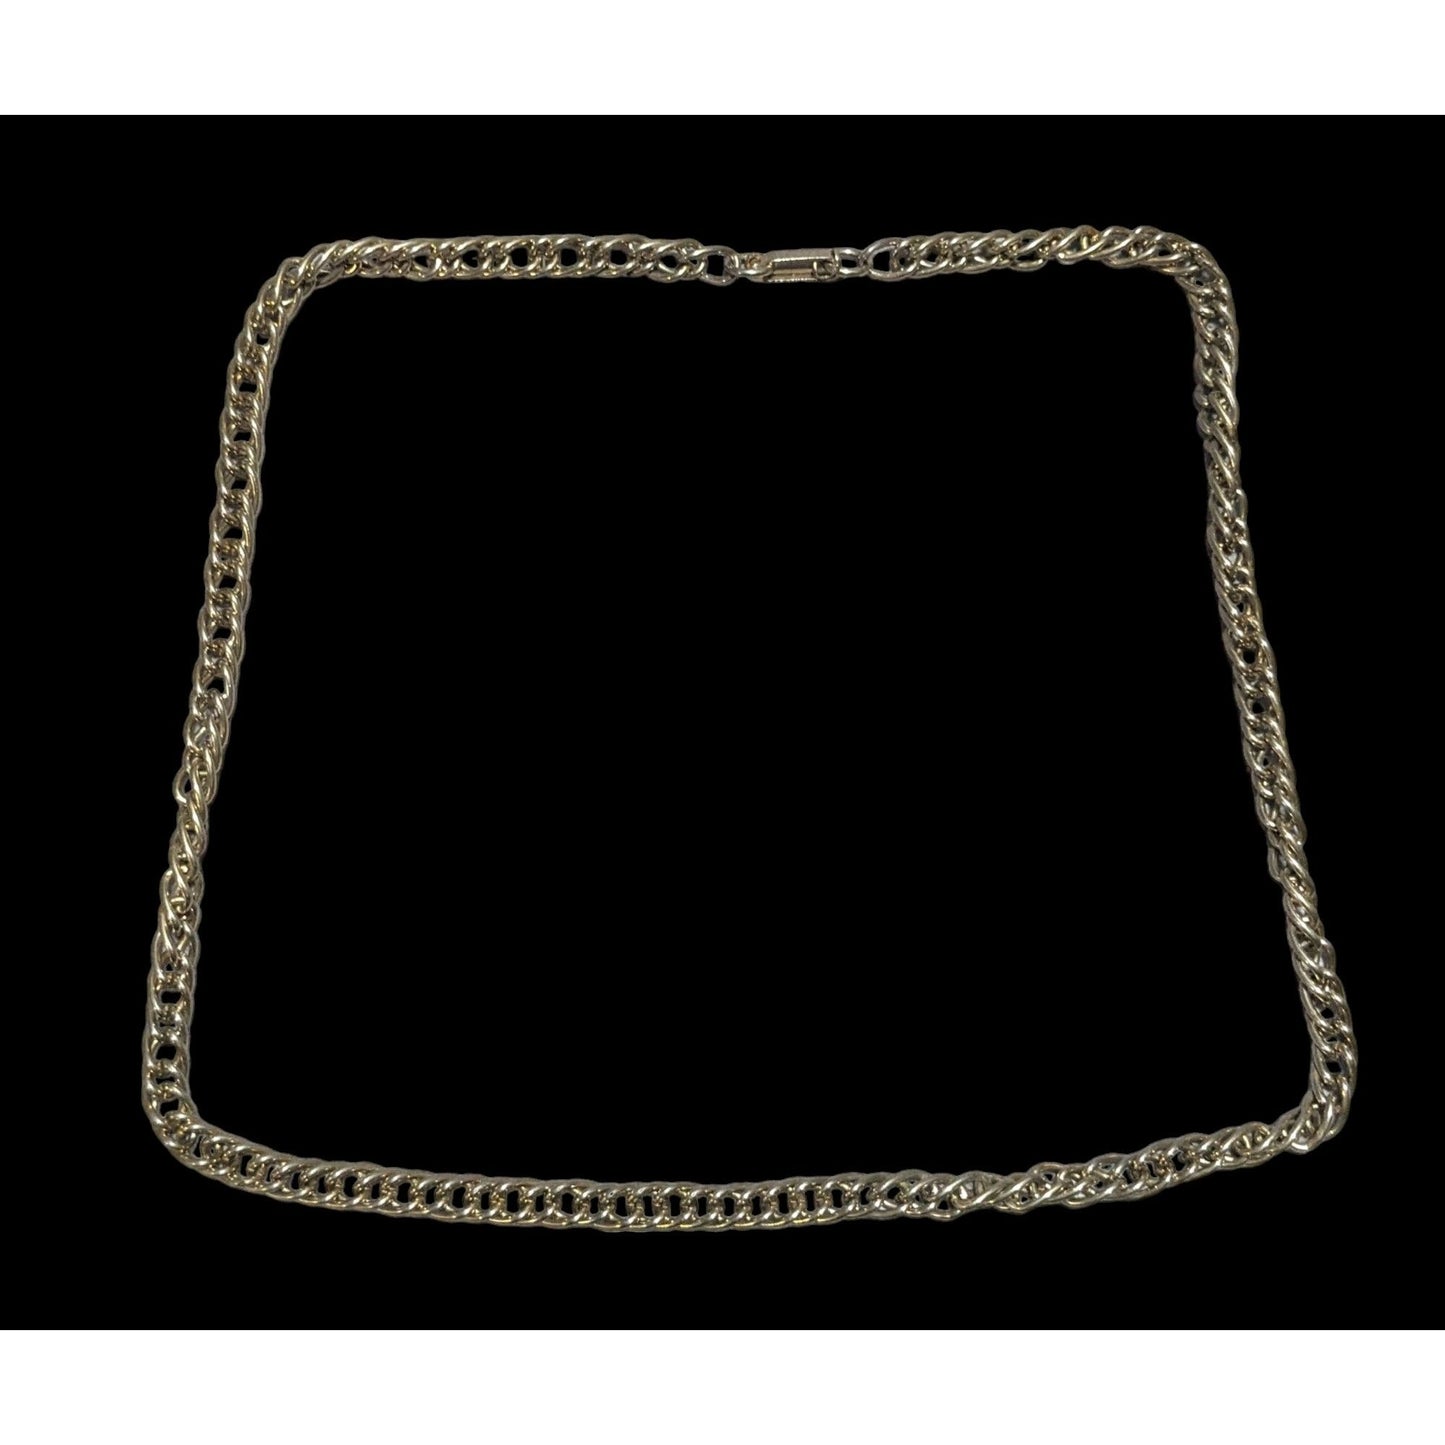 Casual Figaro Chain Necklace